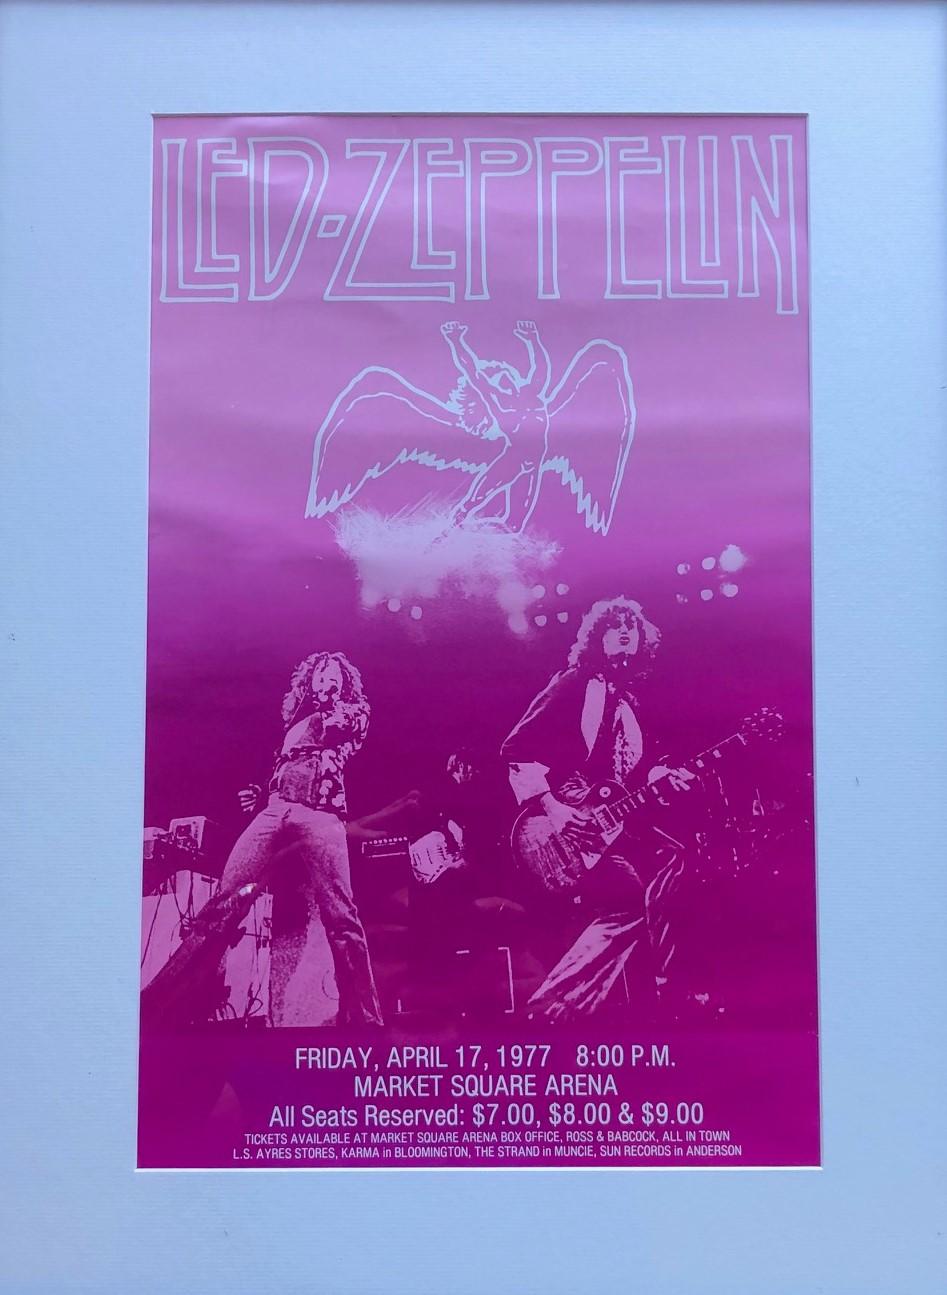 Highly collectible 1977 Led Zeppelin vintage concert poster live at Market Square Arena. The concert took place on April 17, 1977.

Located in Indianapolis, Indiana, with a seating capacity of 16,500, Market Square Arena, was constructed in 1974,